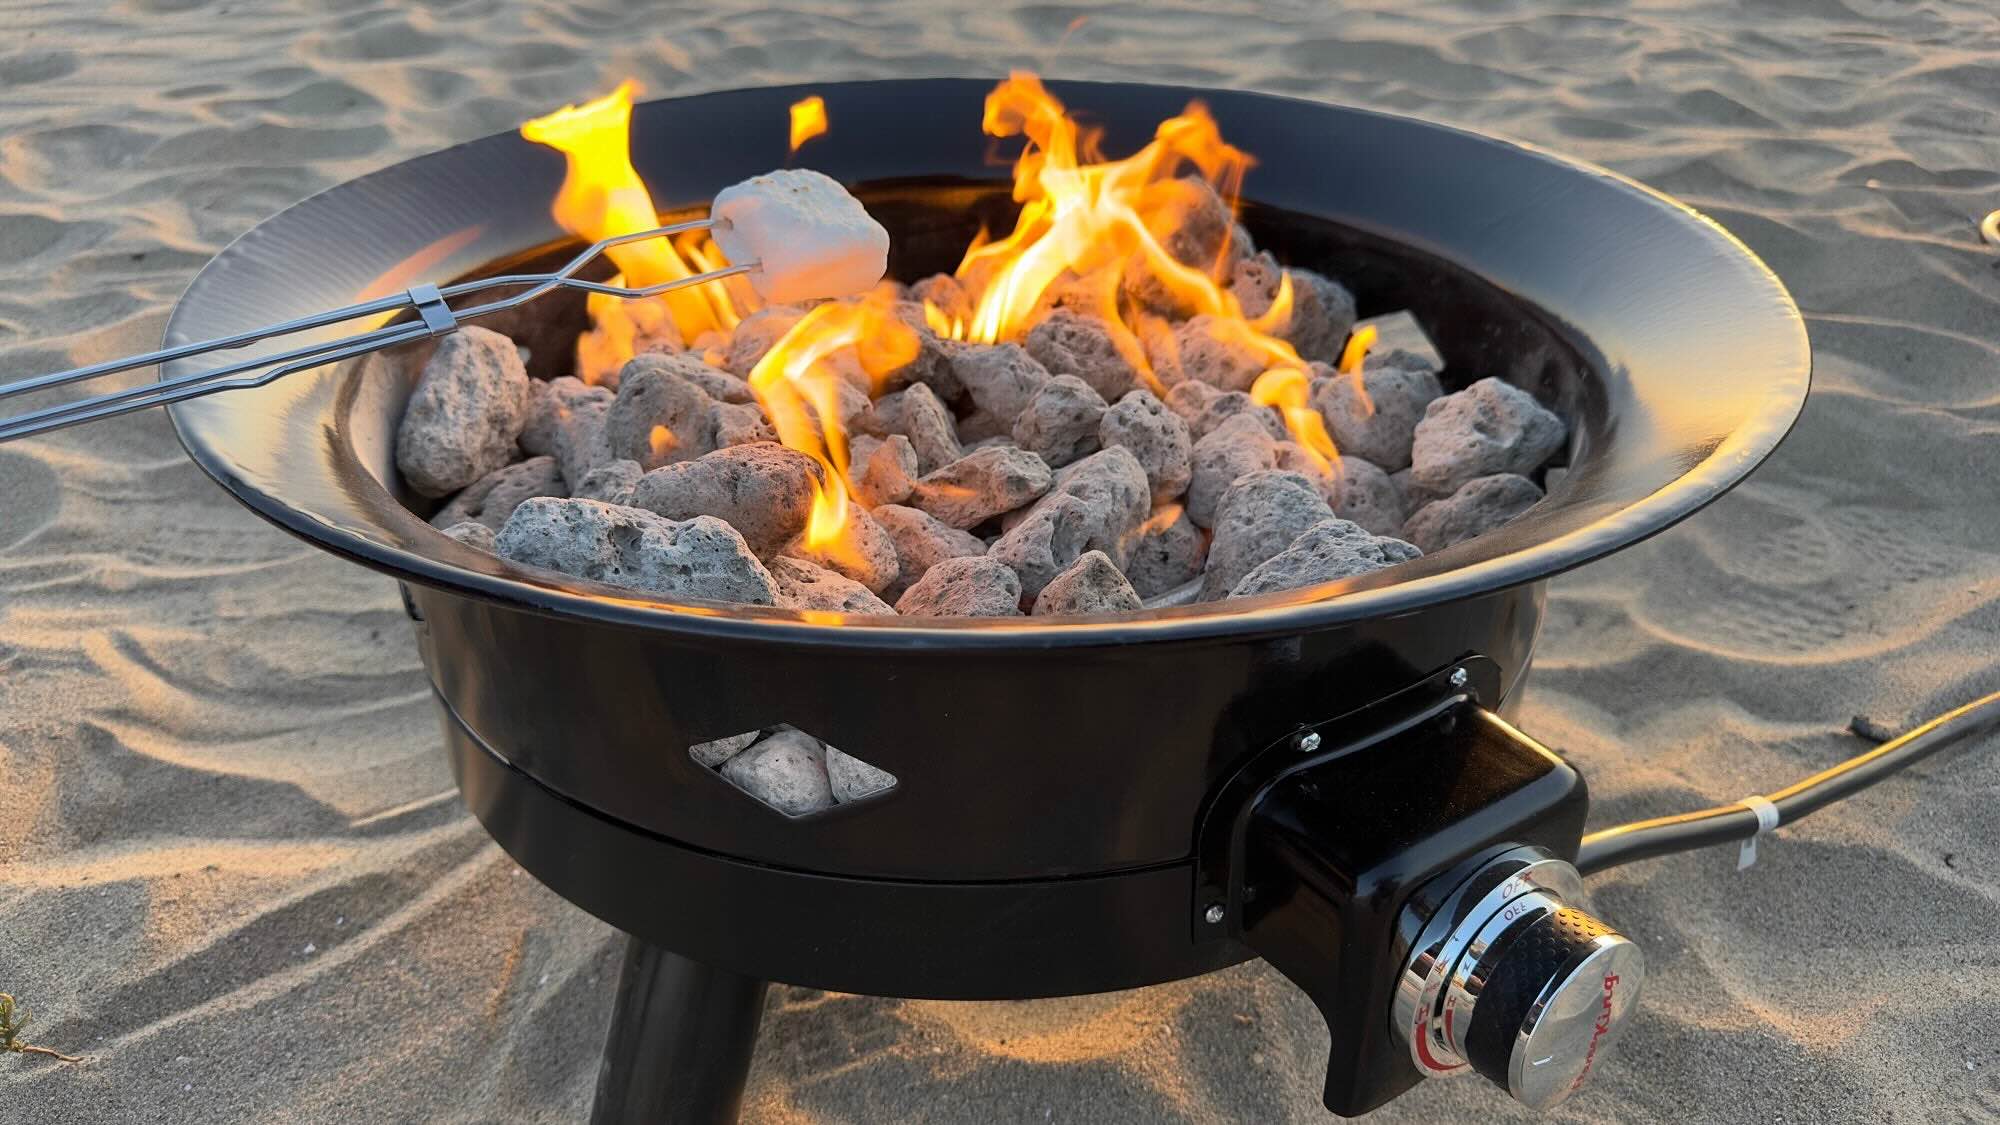 How To Light A Propane Fire Pit